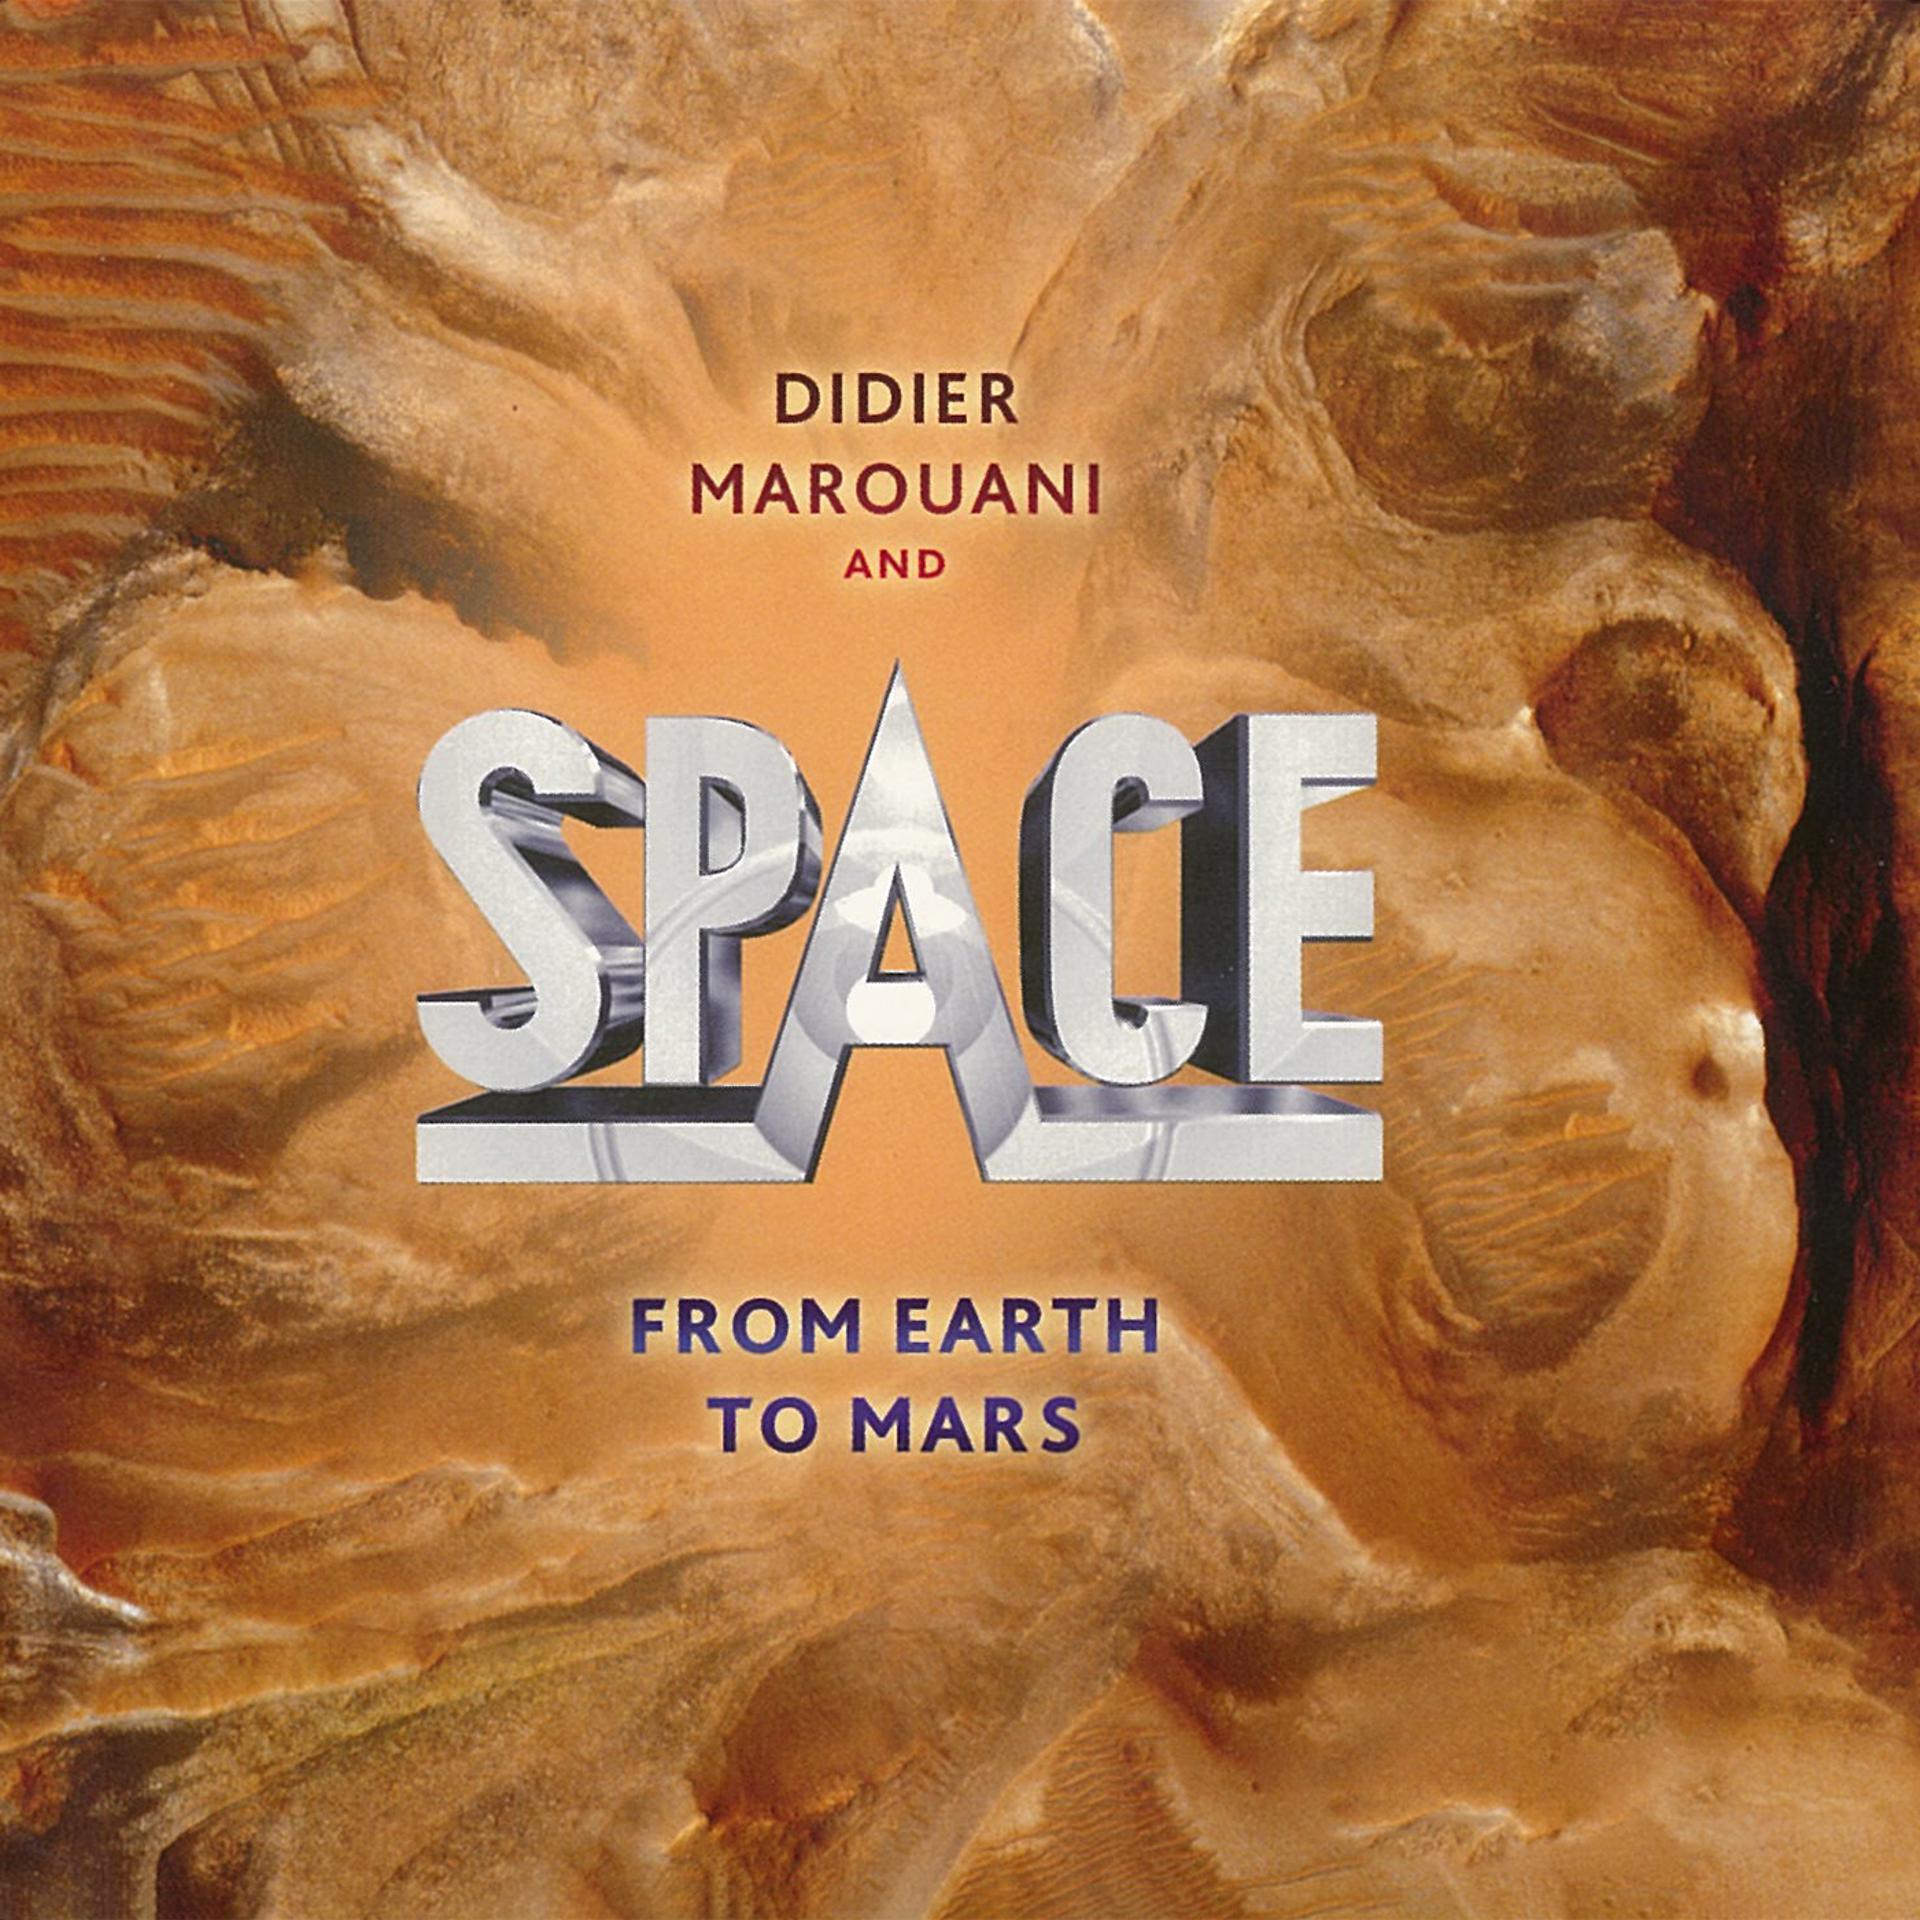 Space didier. Didier Marouani & Space - from Earth to Mars обложка. Didier Marouani & Space - from Earth to Mars - 2011,. Didier Marouani обложки дисков. Спейс Дидье Маруани 1977.